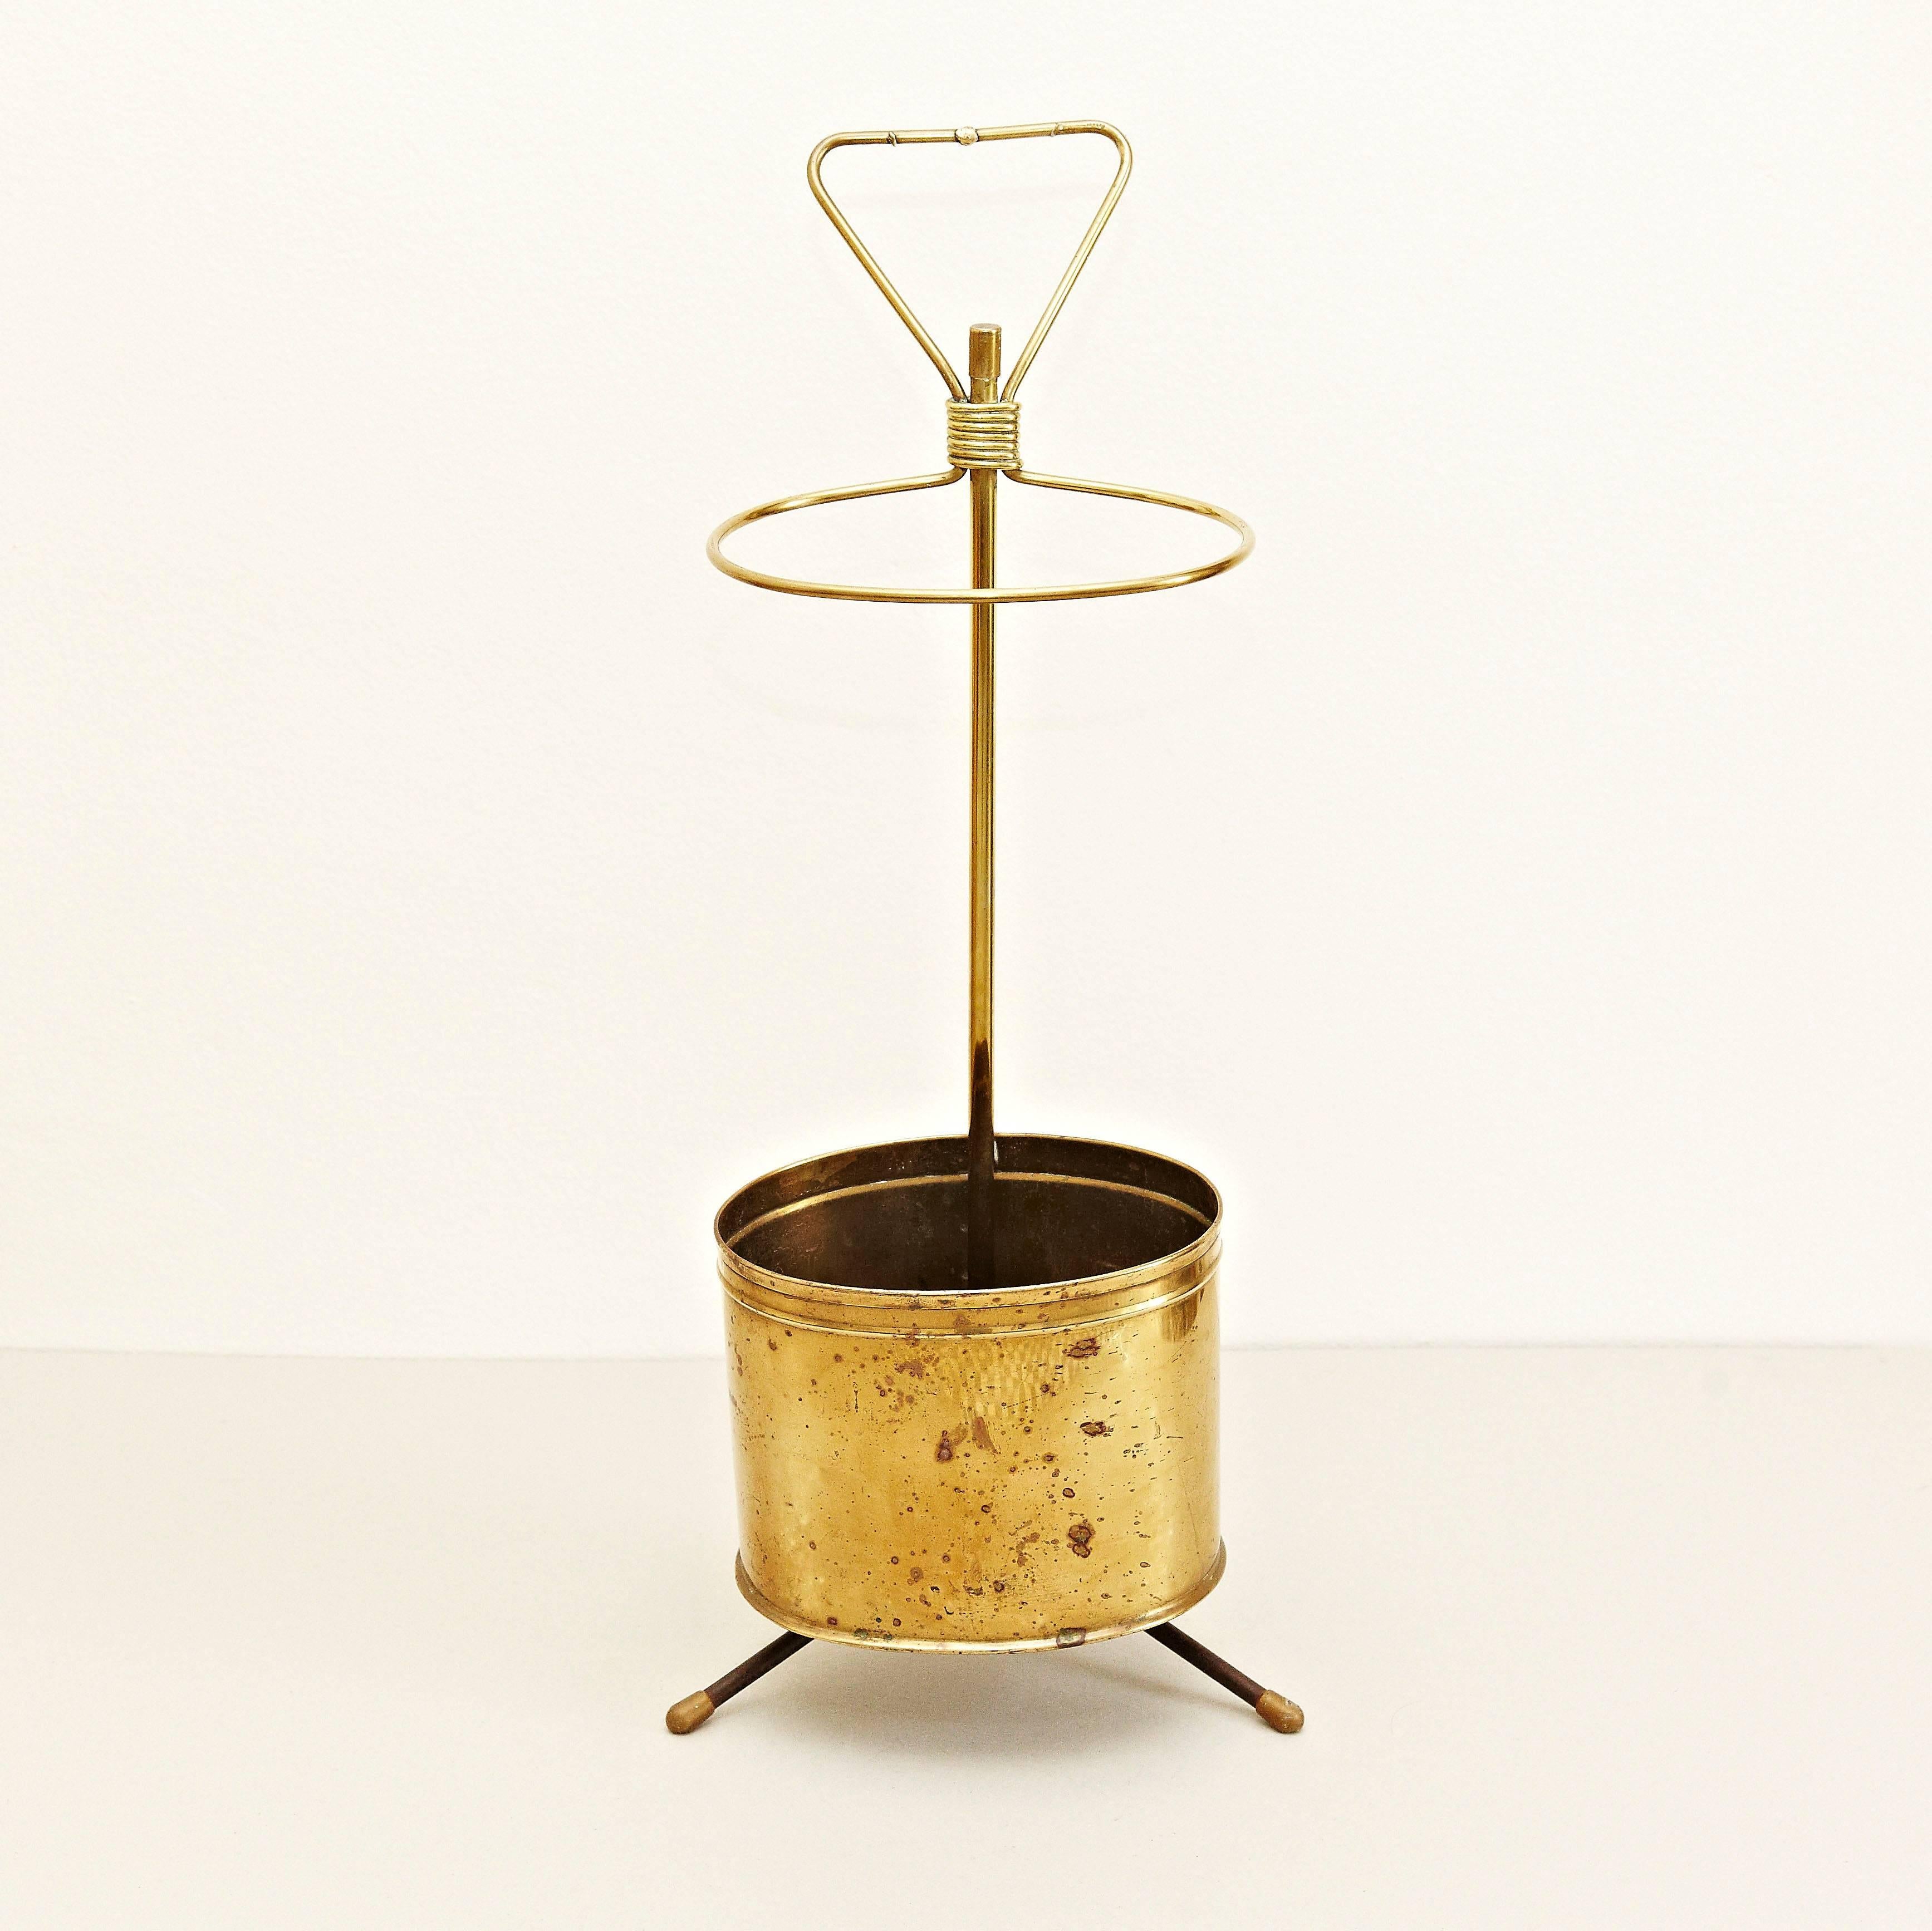 Umbrella stand designed by Mathieu Matégot.
Manufactured by Ateliers Matégot (France), circa 1950.
Umbrella stand in bronze.

In good original condition, with minor wear consistent with age and use, preserving a beautiful patina.

Mathieu